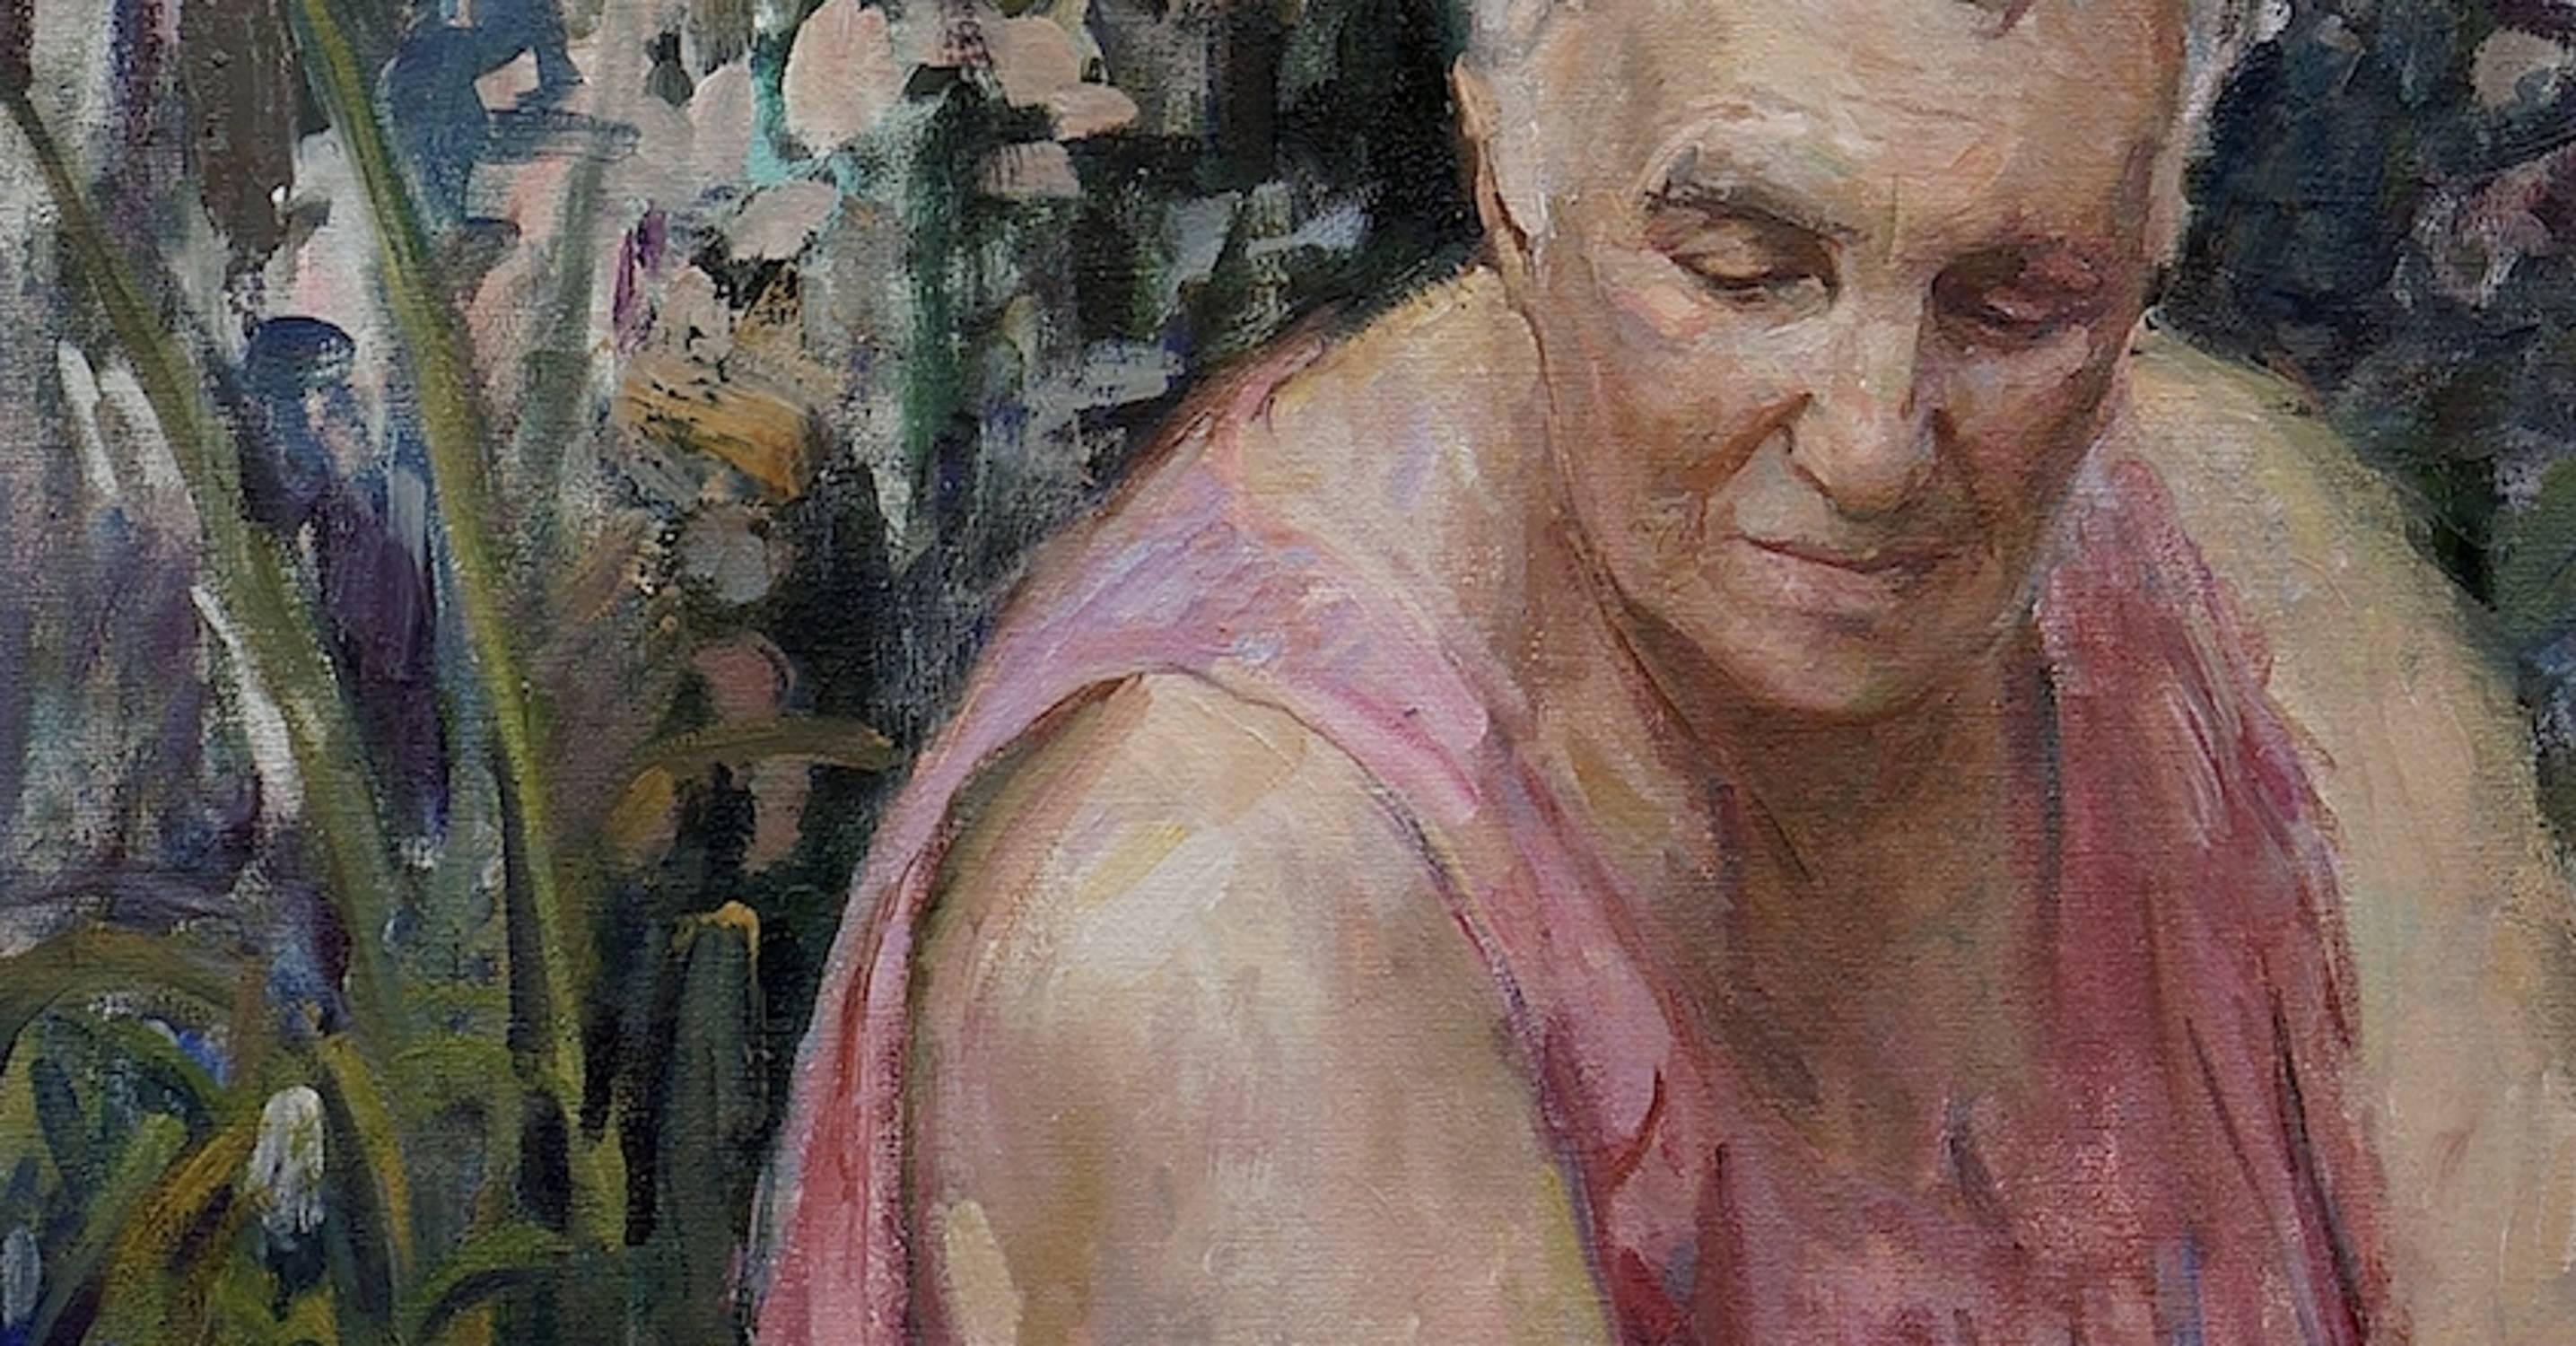 
Iliya Mirochnik’s portrait of his grandmother is exemplary of the artist’s capacity to connect cultures and paint of our times. This is not simply a nostalgia painting of an elderly, Russian woman with a kerchief, but rather an authentic